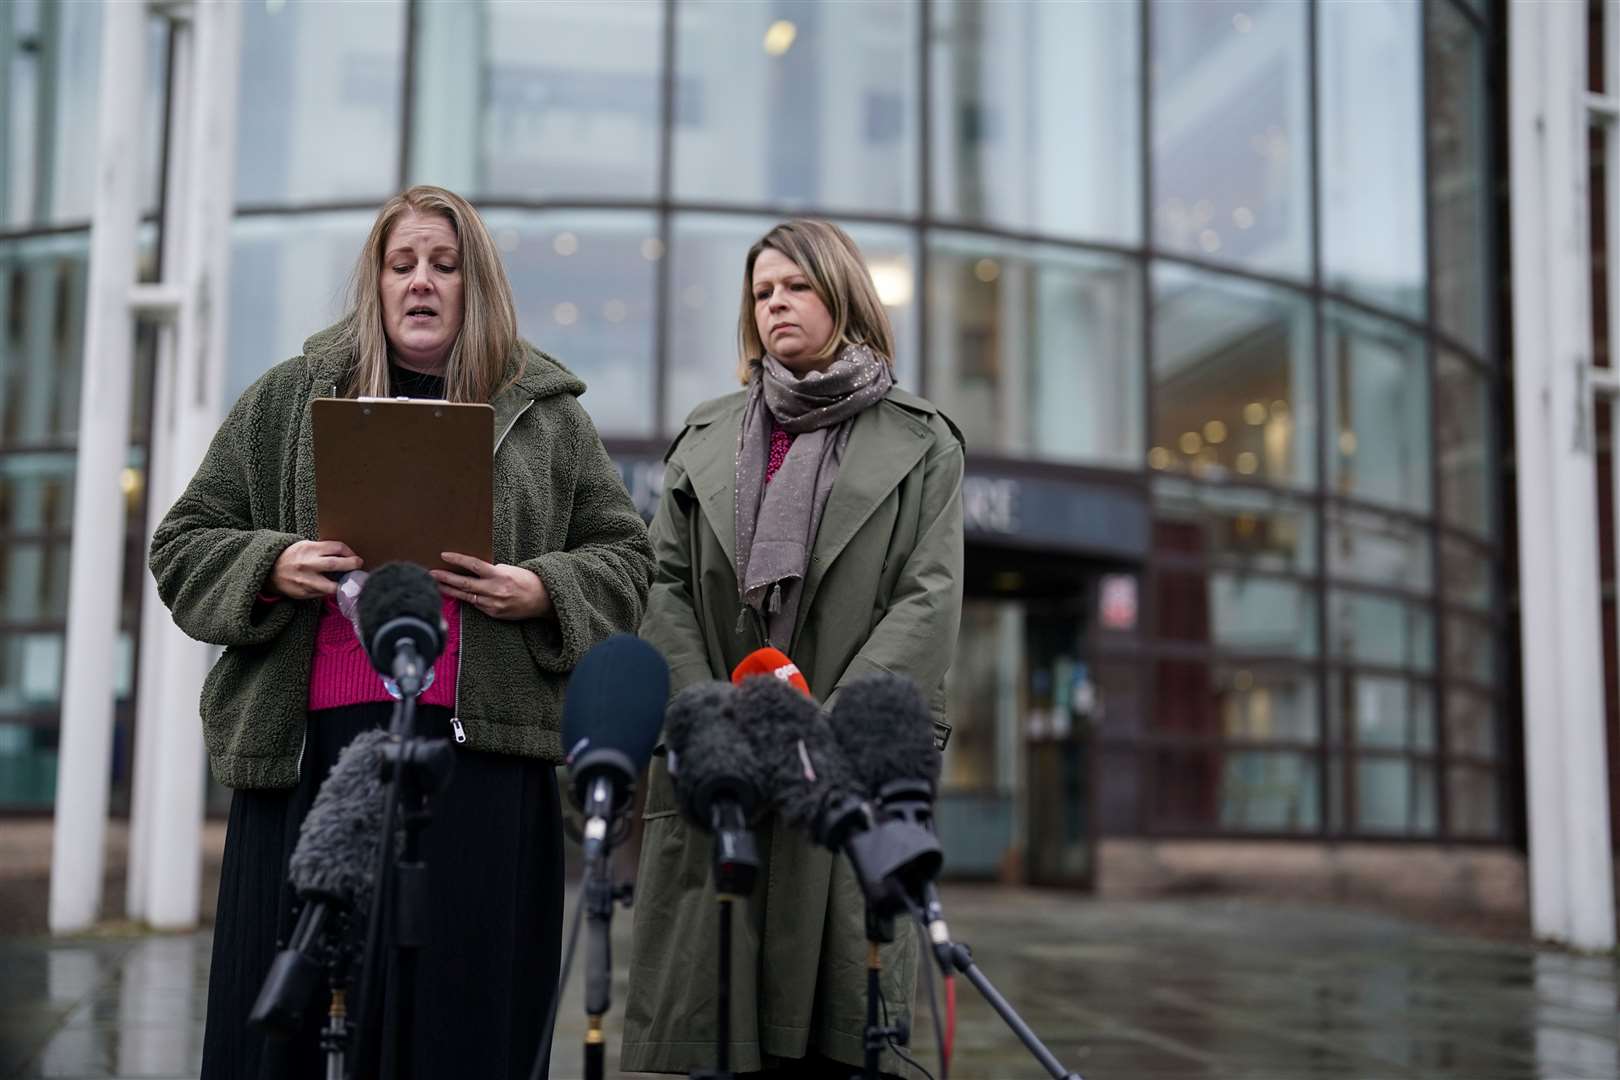 Sarah Andrews (left) said the NUH trust “failed to listen and learn” to warnings about unsafe care, in a statement outside Nottingham Magistrates’ Court on Wednesday (Jacob King/PA)